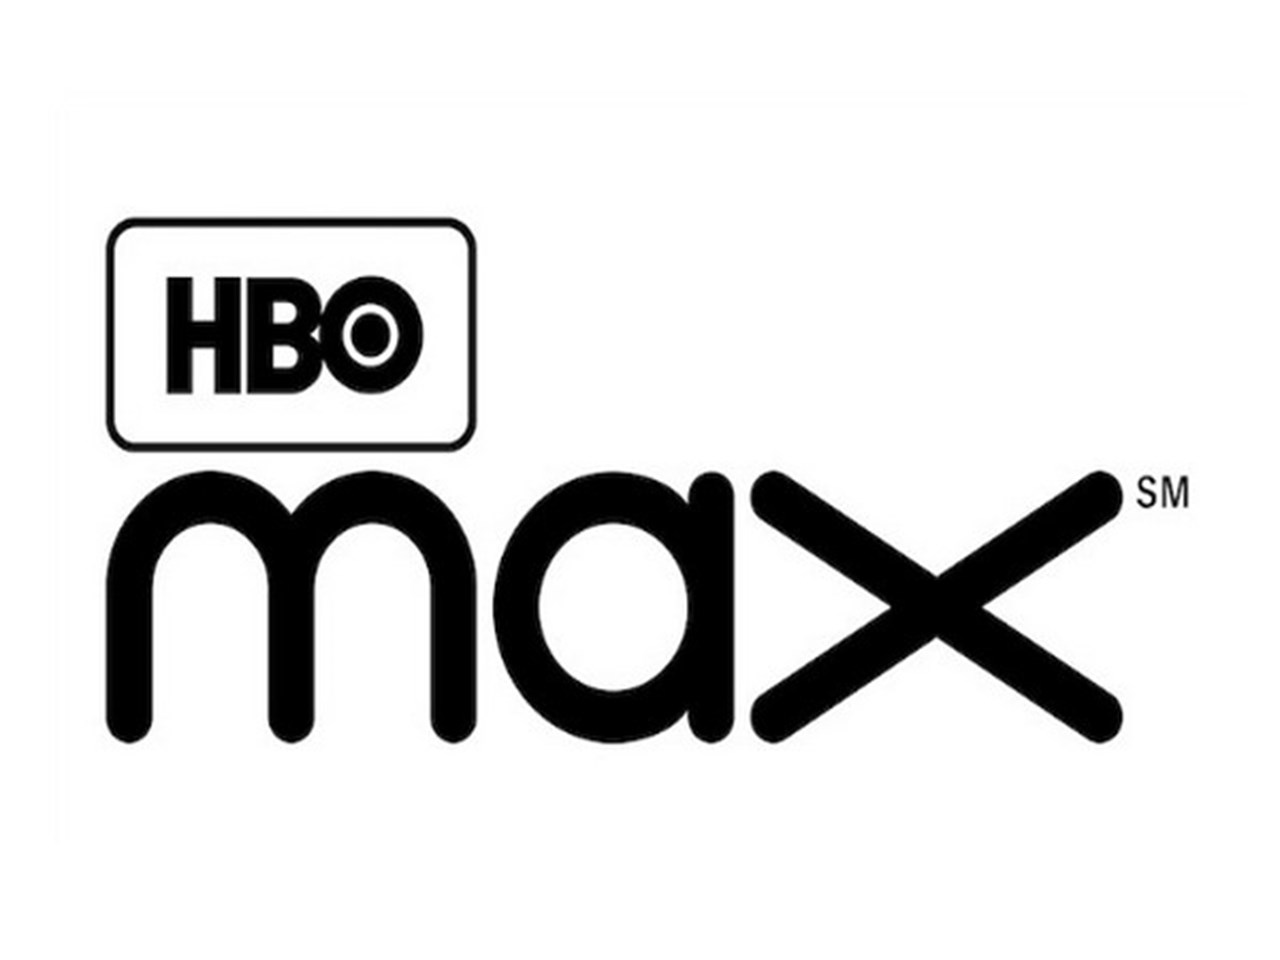 Read more about HBO Max sets launch date on Devdiscourse. 